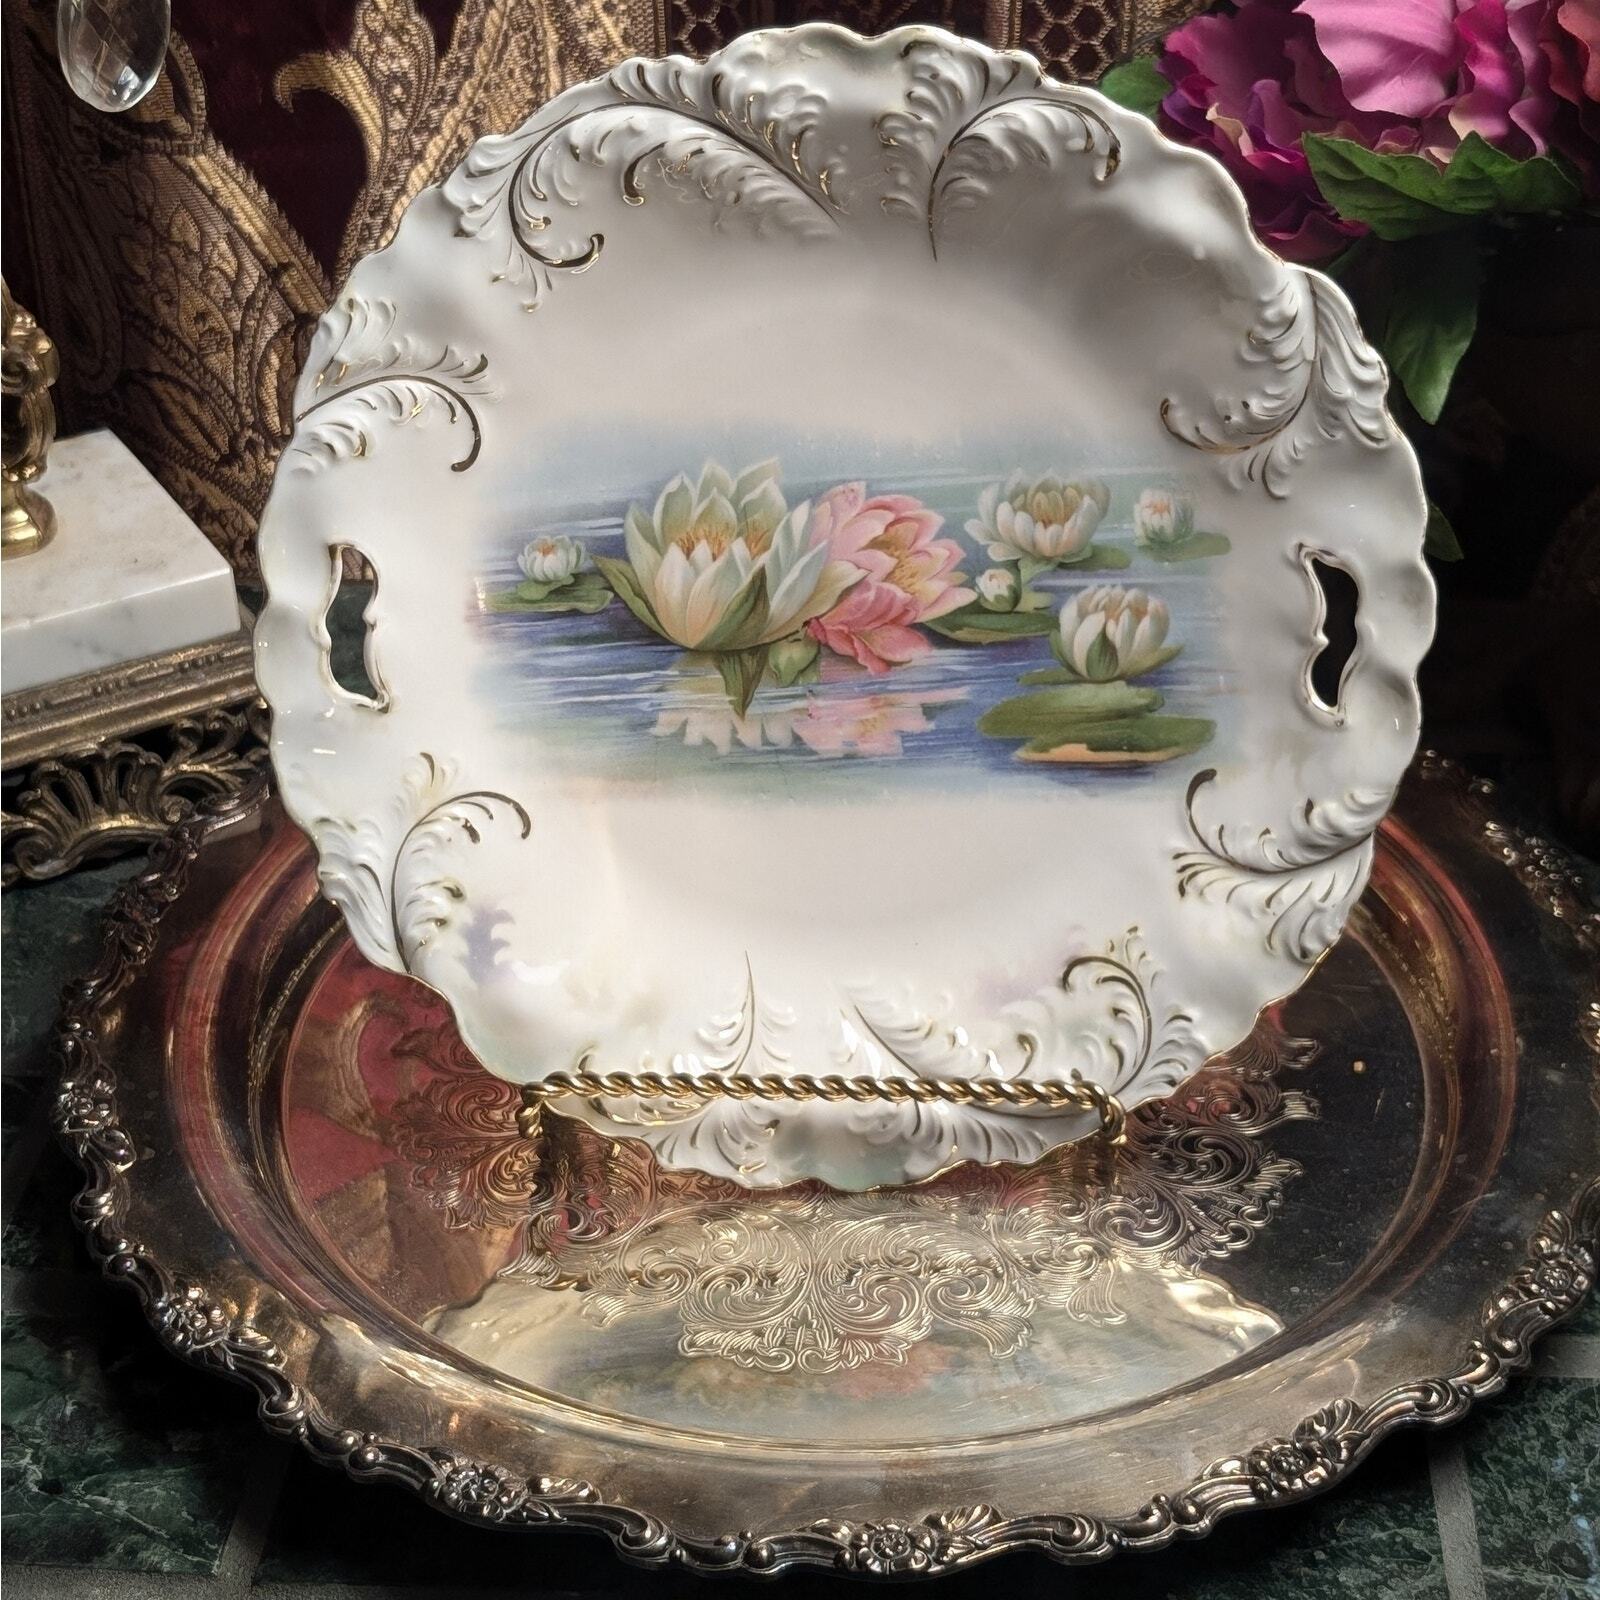 Antique R.S. Prussia Plumes Mold Water Lily Reflection Handled Plate C.1904-1910